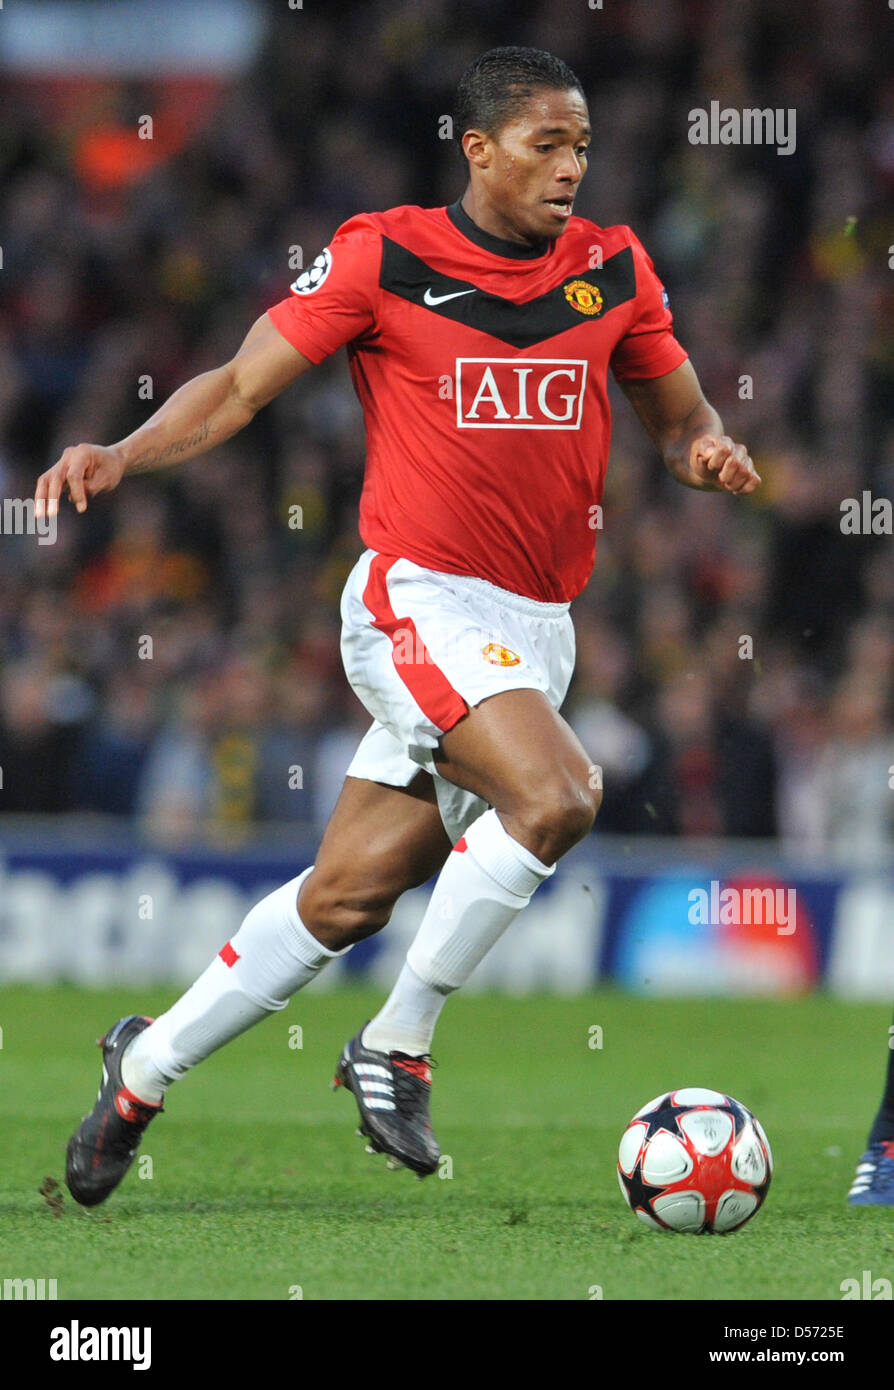 United's Antonio Valencia controls the ball during UEFA Champions League quarter-final match Manchester United vs Bayern Munich at Old Trafford stadium in Manchester, Great Britain, 07 April 2010. Manchester United won the second leg 3-2, yet Munich moves up to semi-final winning 4-4 on aggregate and away goals. Photo: ANDREAS GEBERT Stock Photo